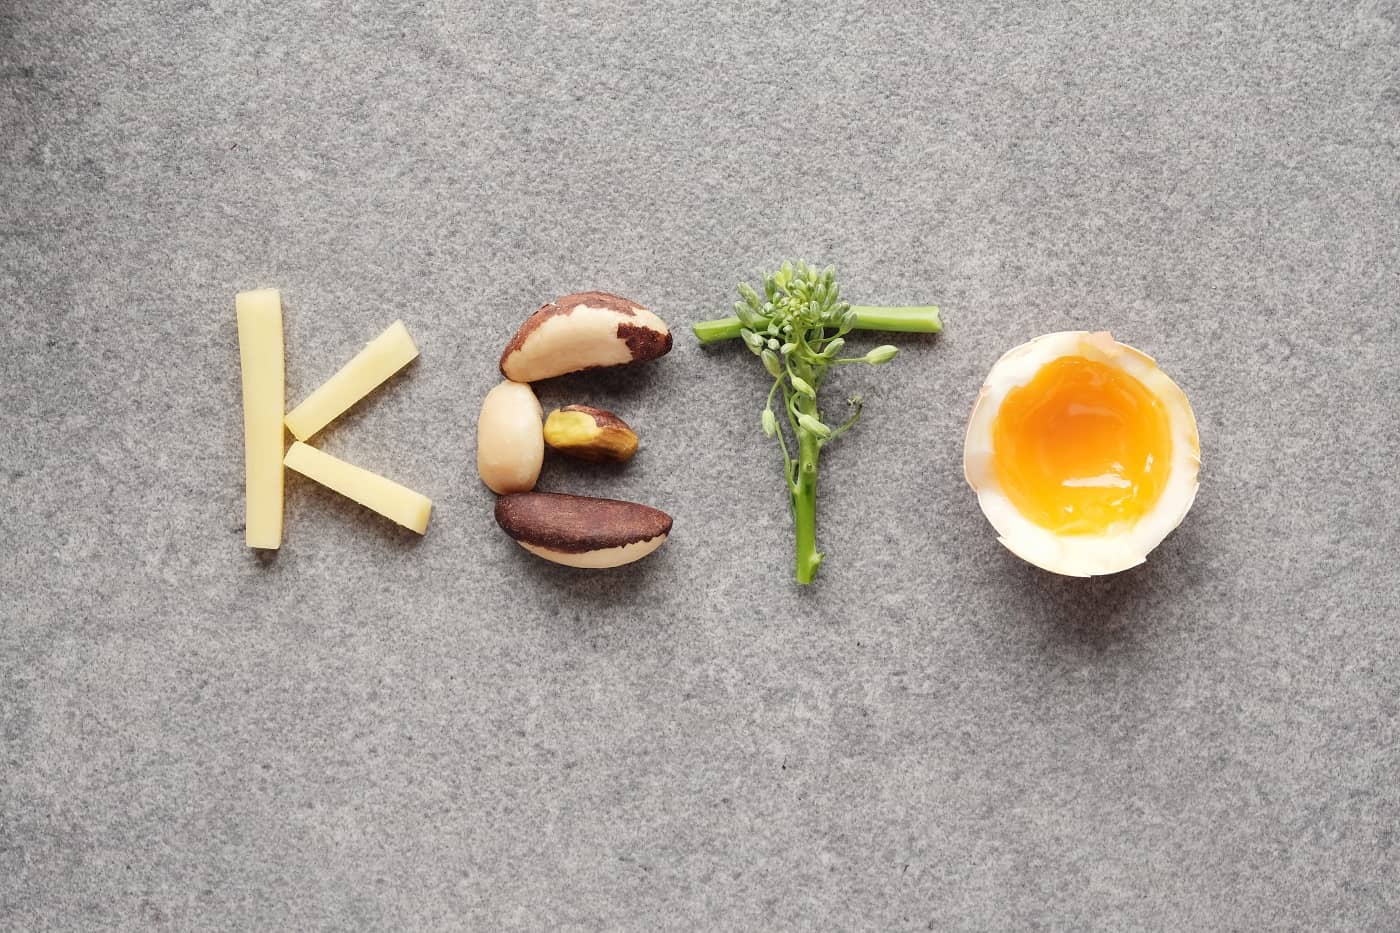 how many eggs per day can someone eat on keto